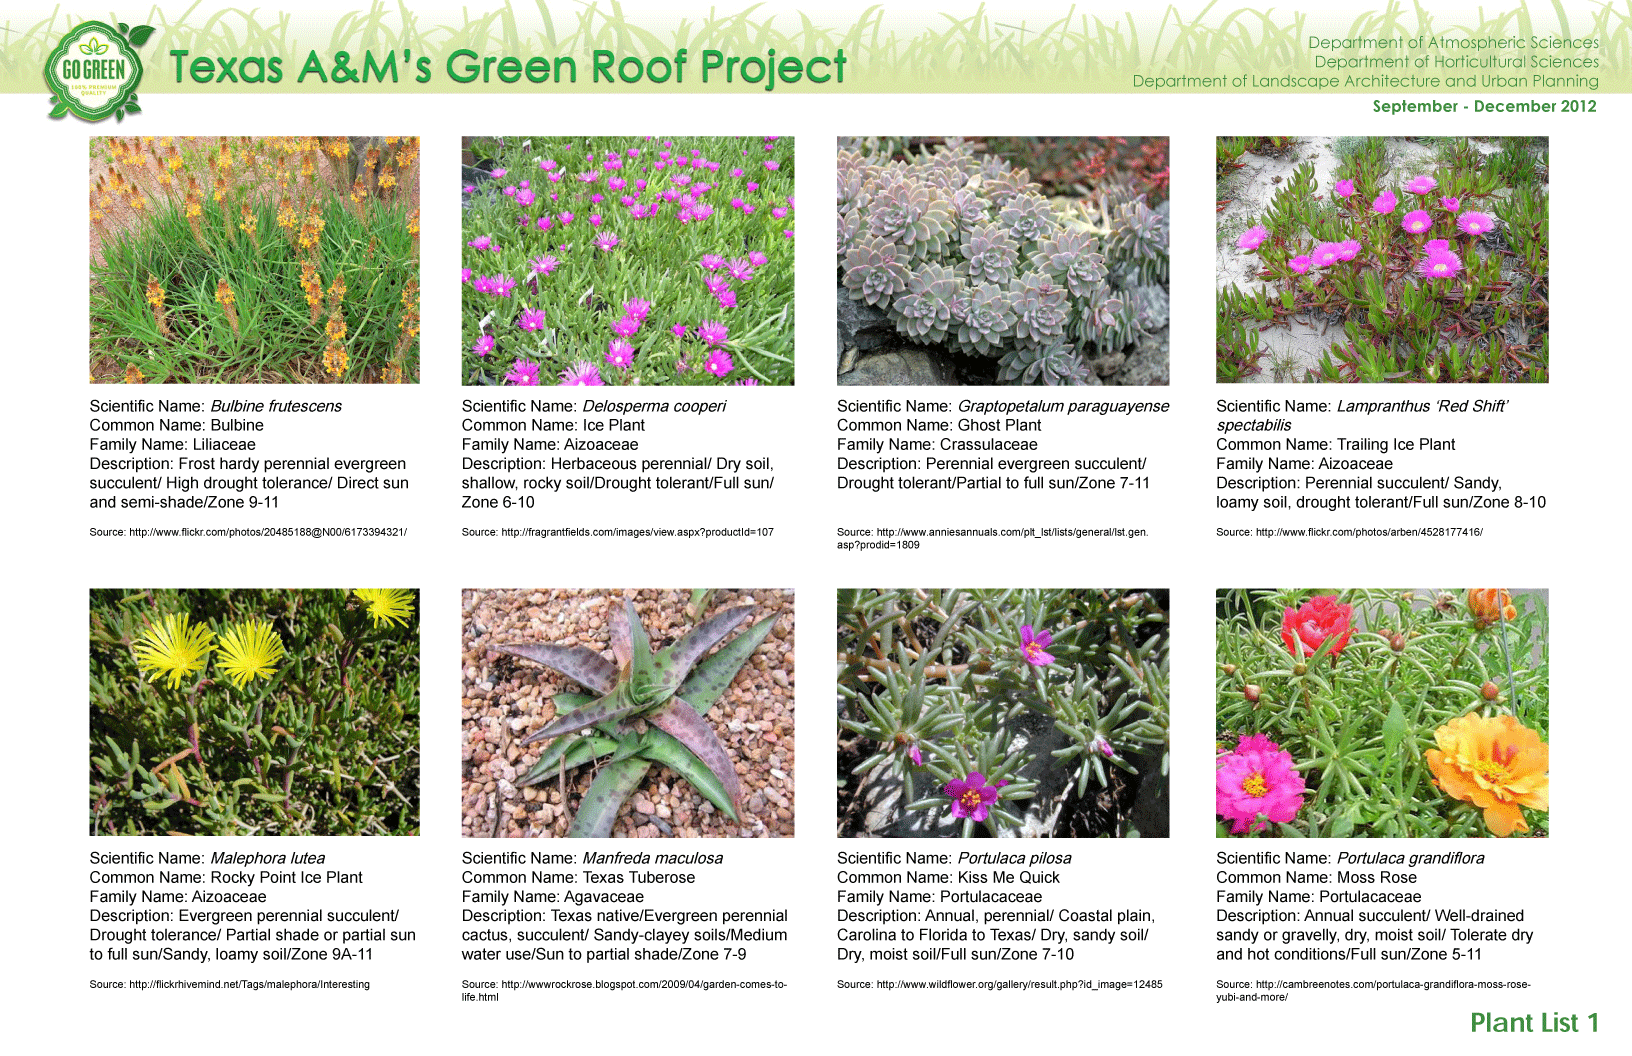 Langford green roof plant list by Ao Shi | Texas A&M's ...